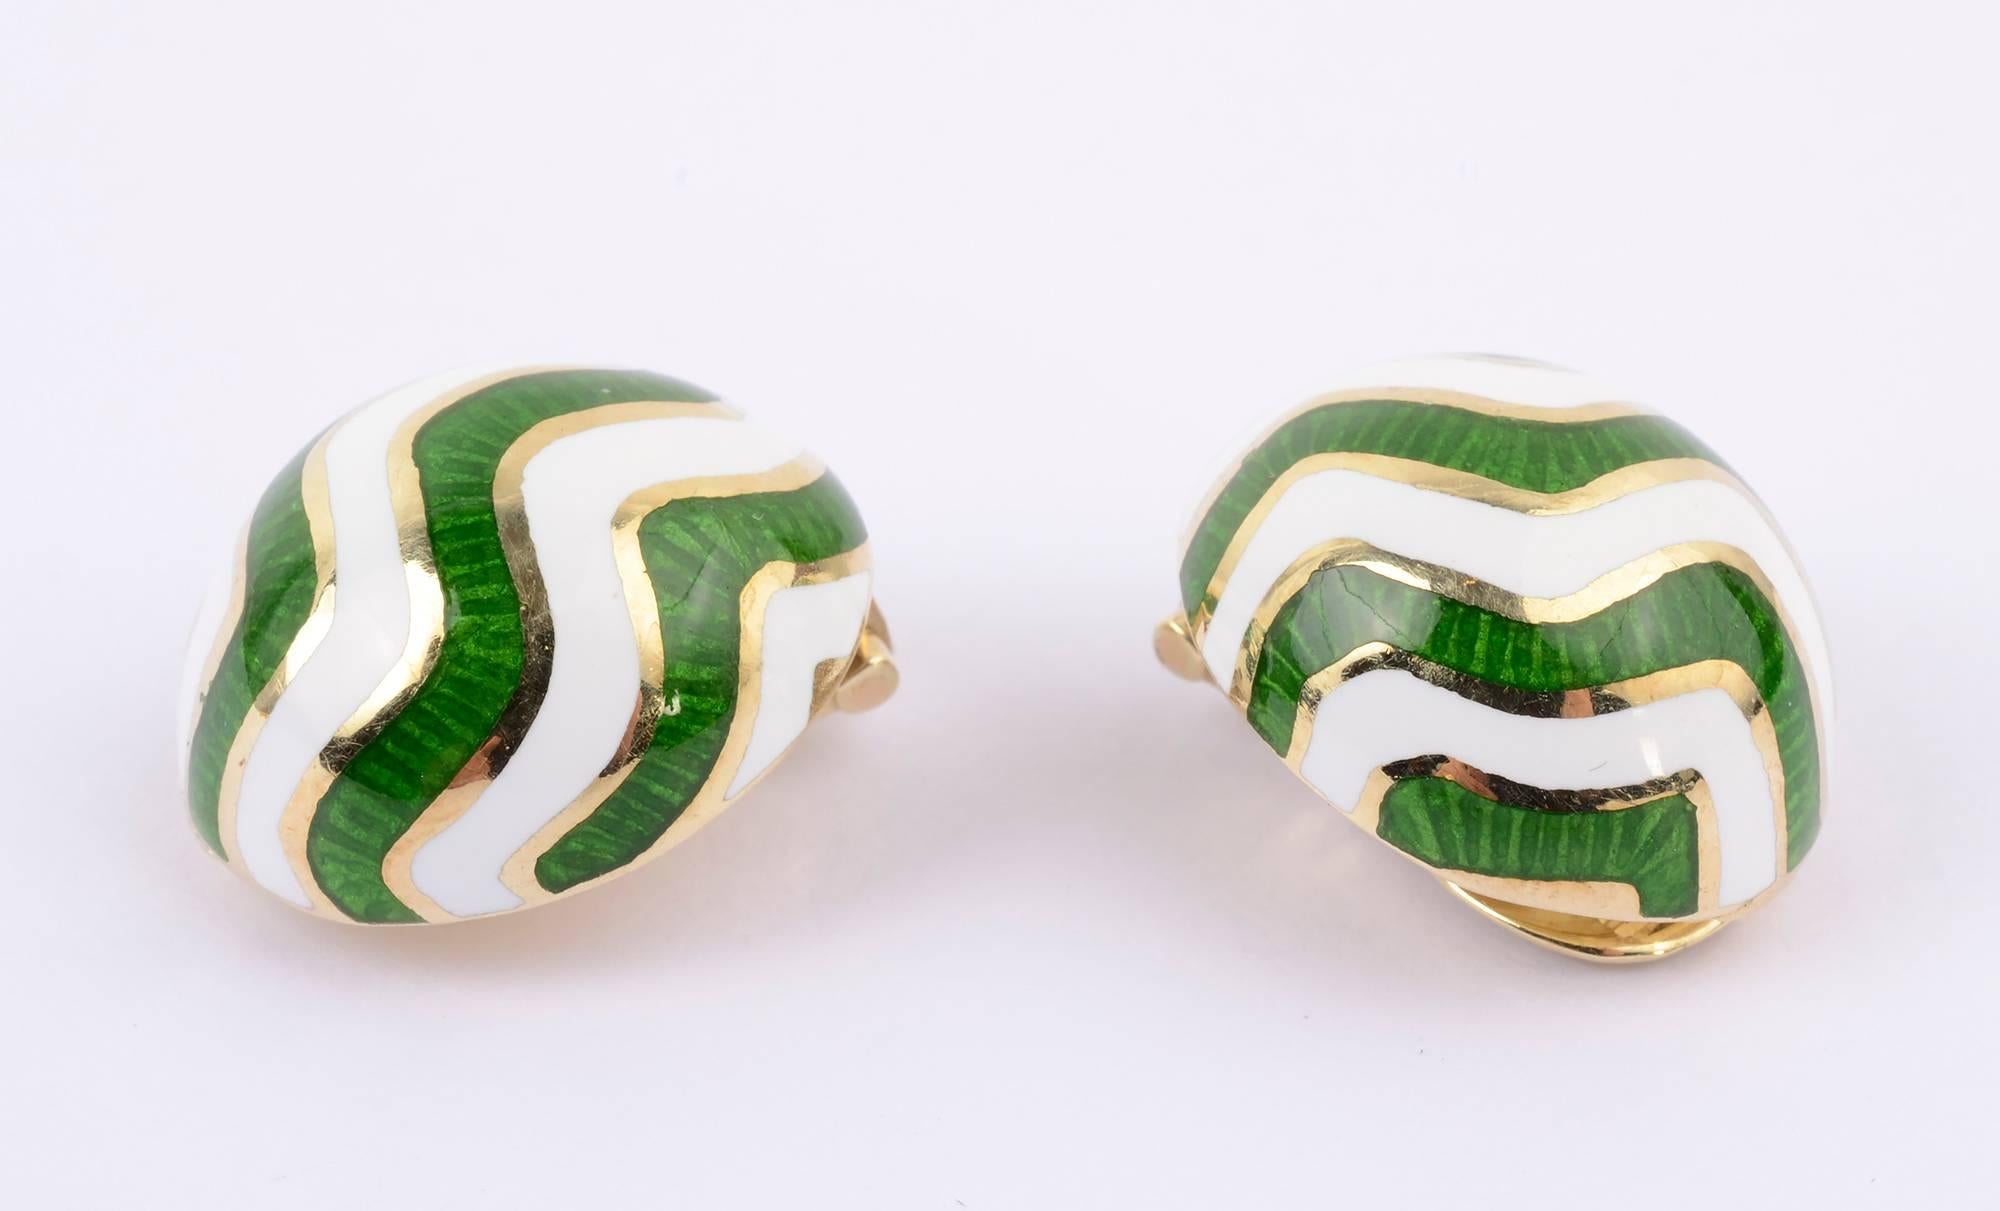 Jazzy enamel earrings by Martine. The alternating zigzags of green and white enamel are banded with 14 karat gold. Backs are clips. The oval earrings measure 3/4 inch x 7/8 inch. Light spots are reflections - they are not damage.